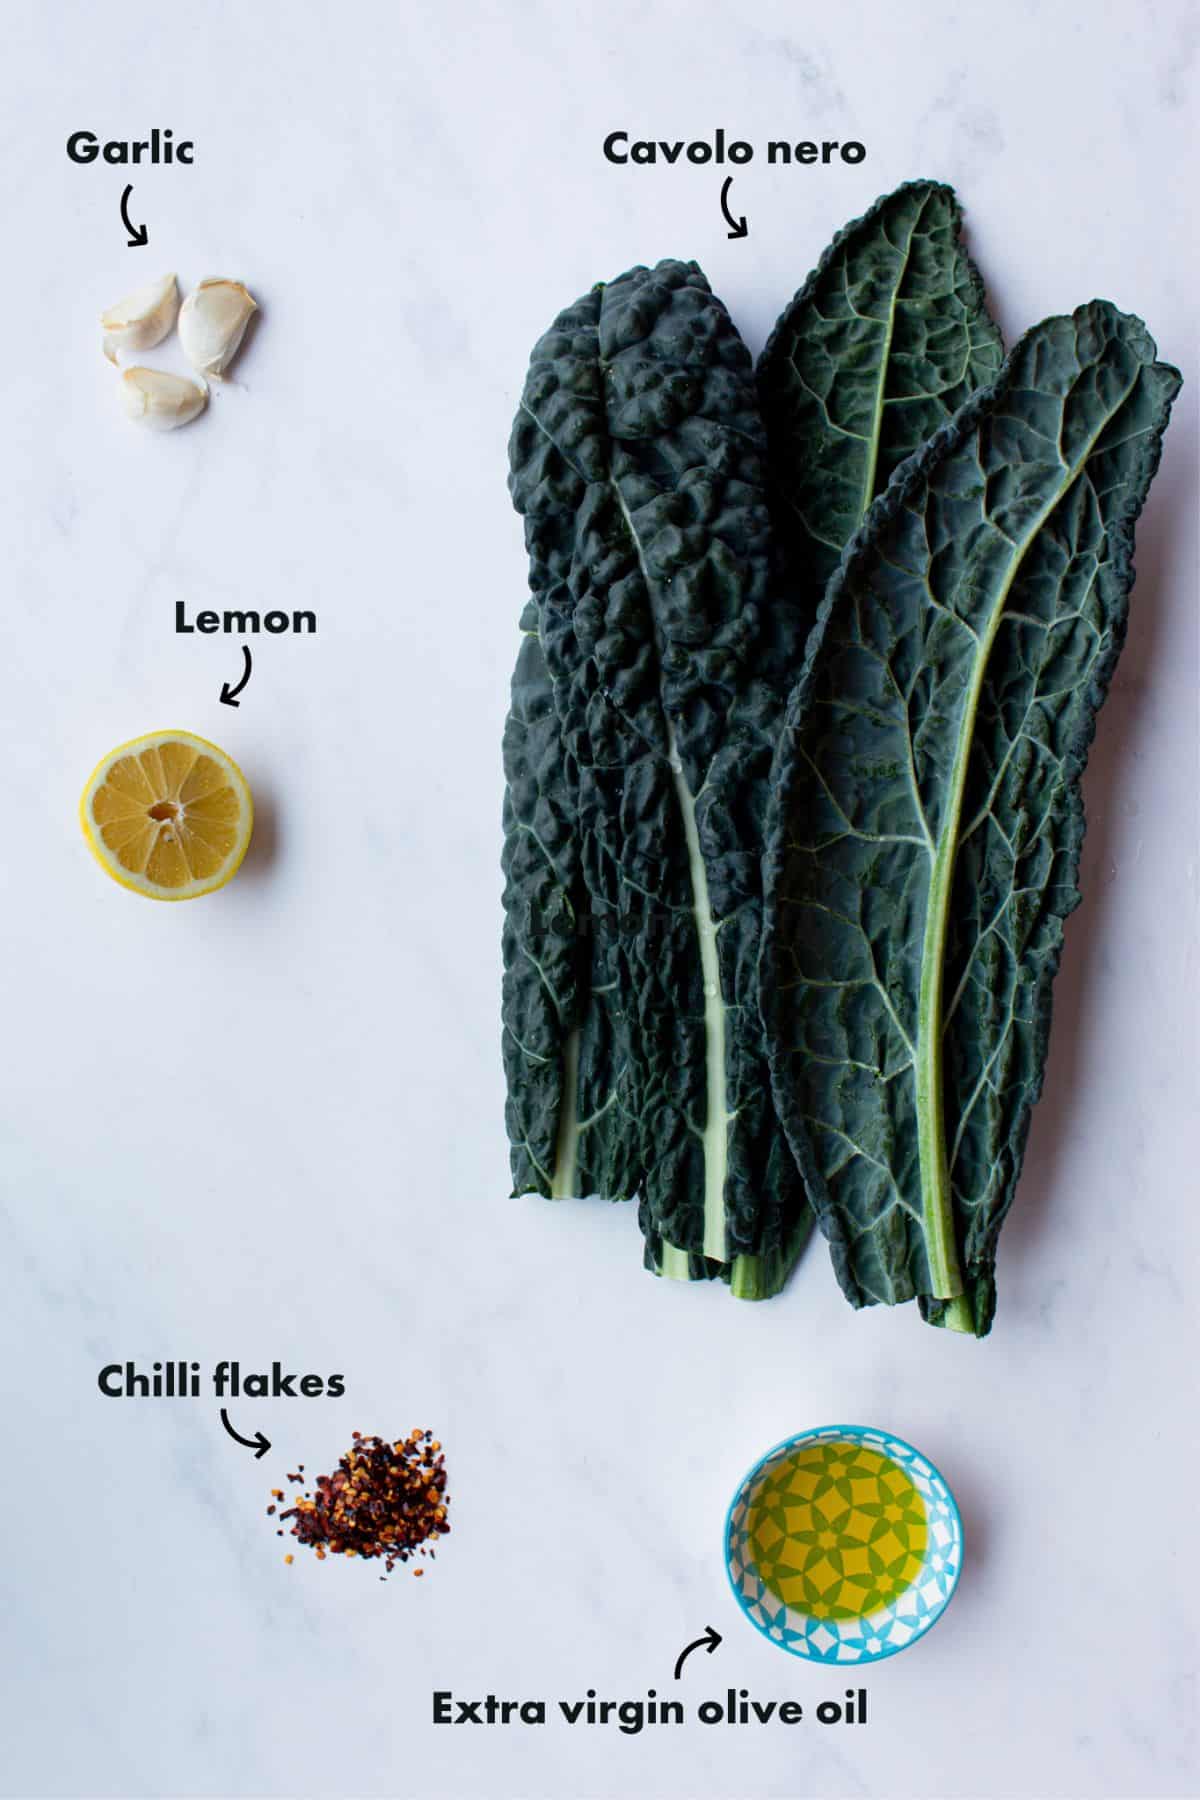 Ingredients to make cavolo nero with garlic and lemon laid out on pale background and labelled.